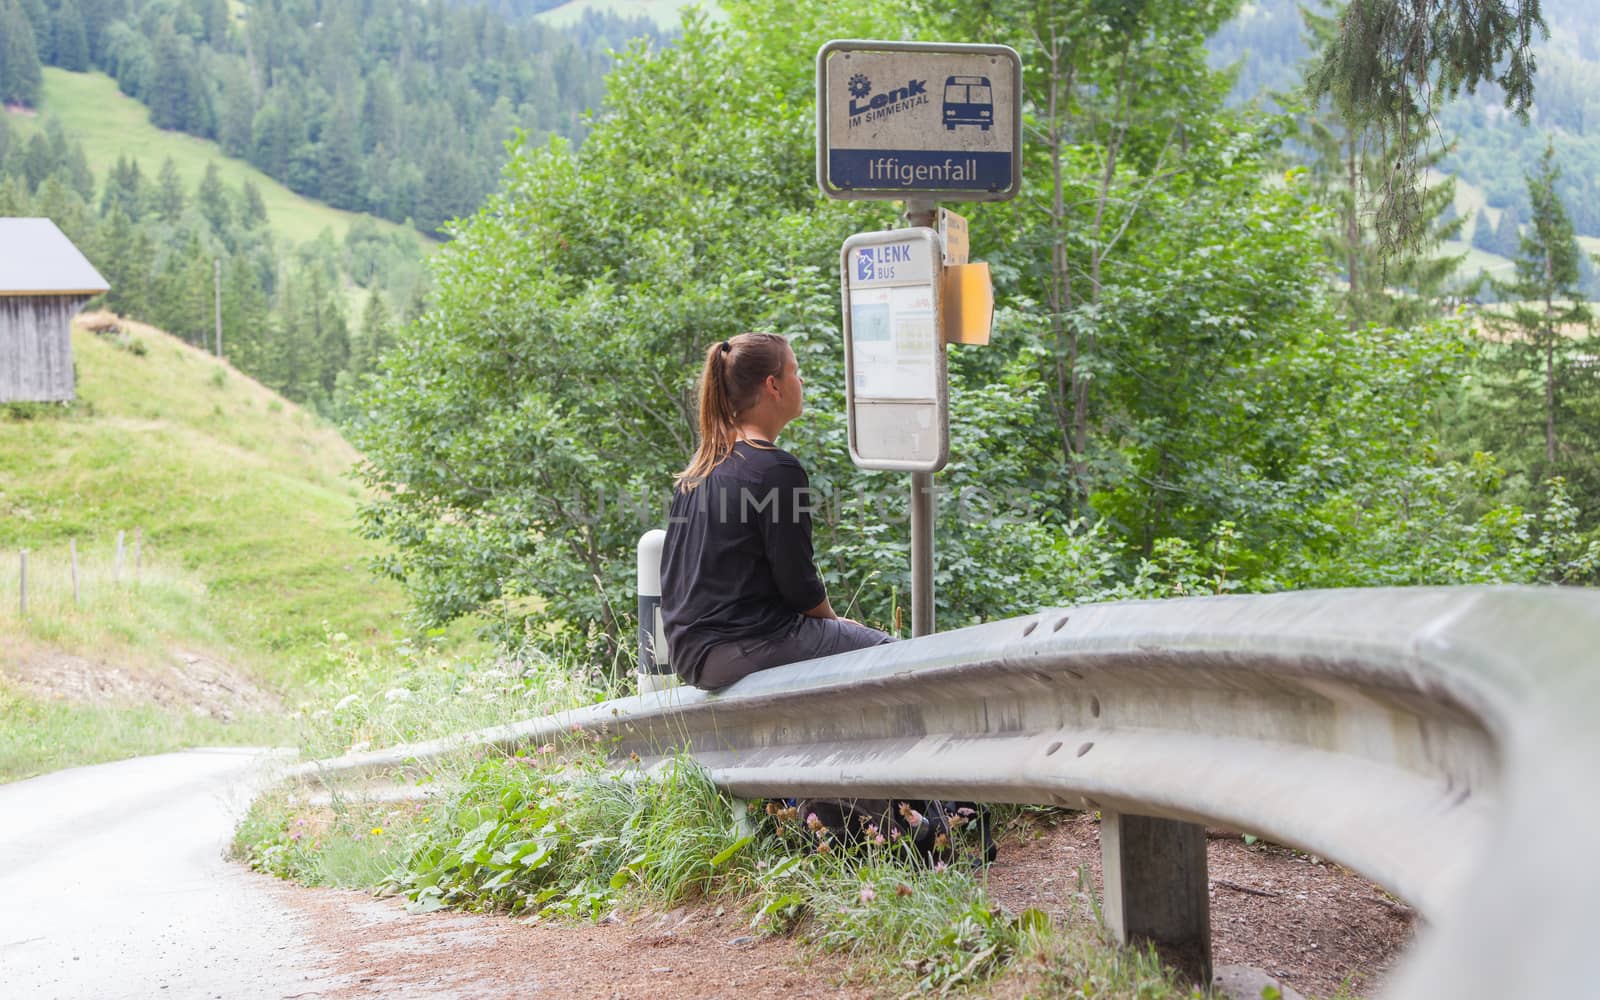 LENK, SWITZERLAND - JULY 23, 2015: Young woman checking the timetable at the bus stop in Lenk, Switzerland on July 23, 2015.